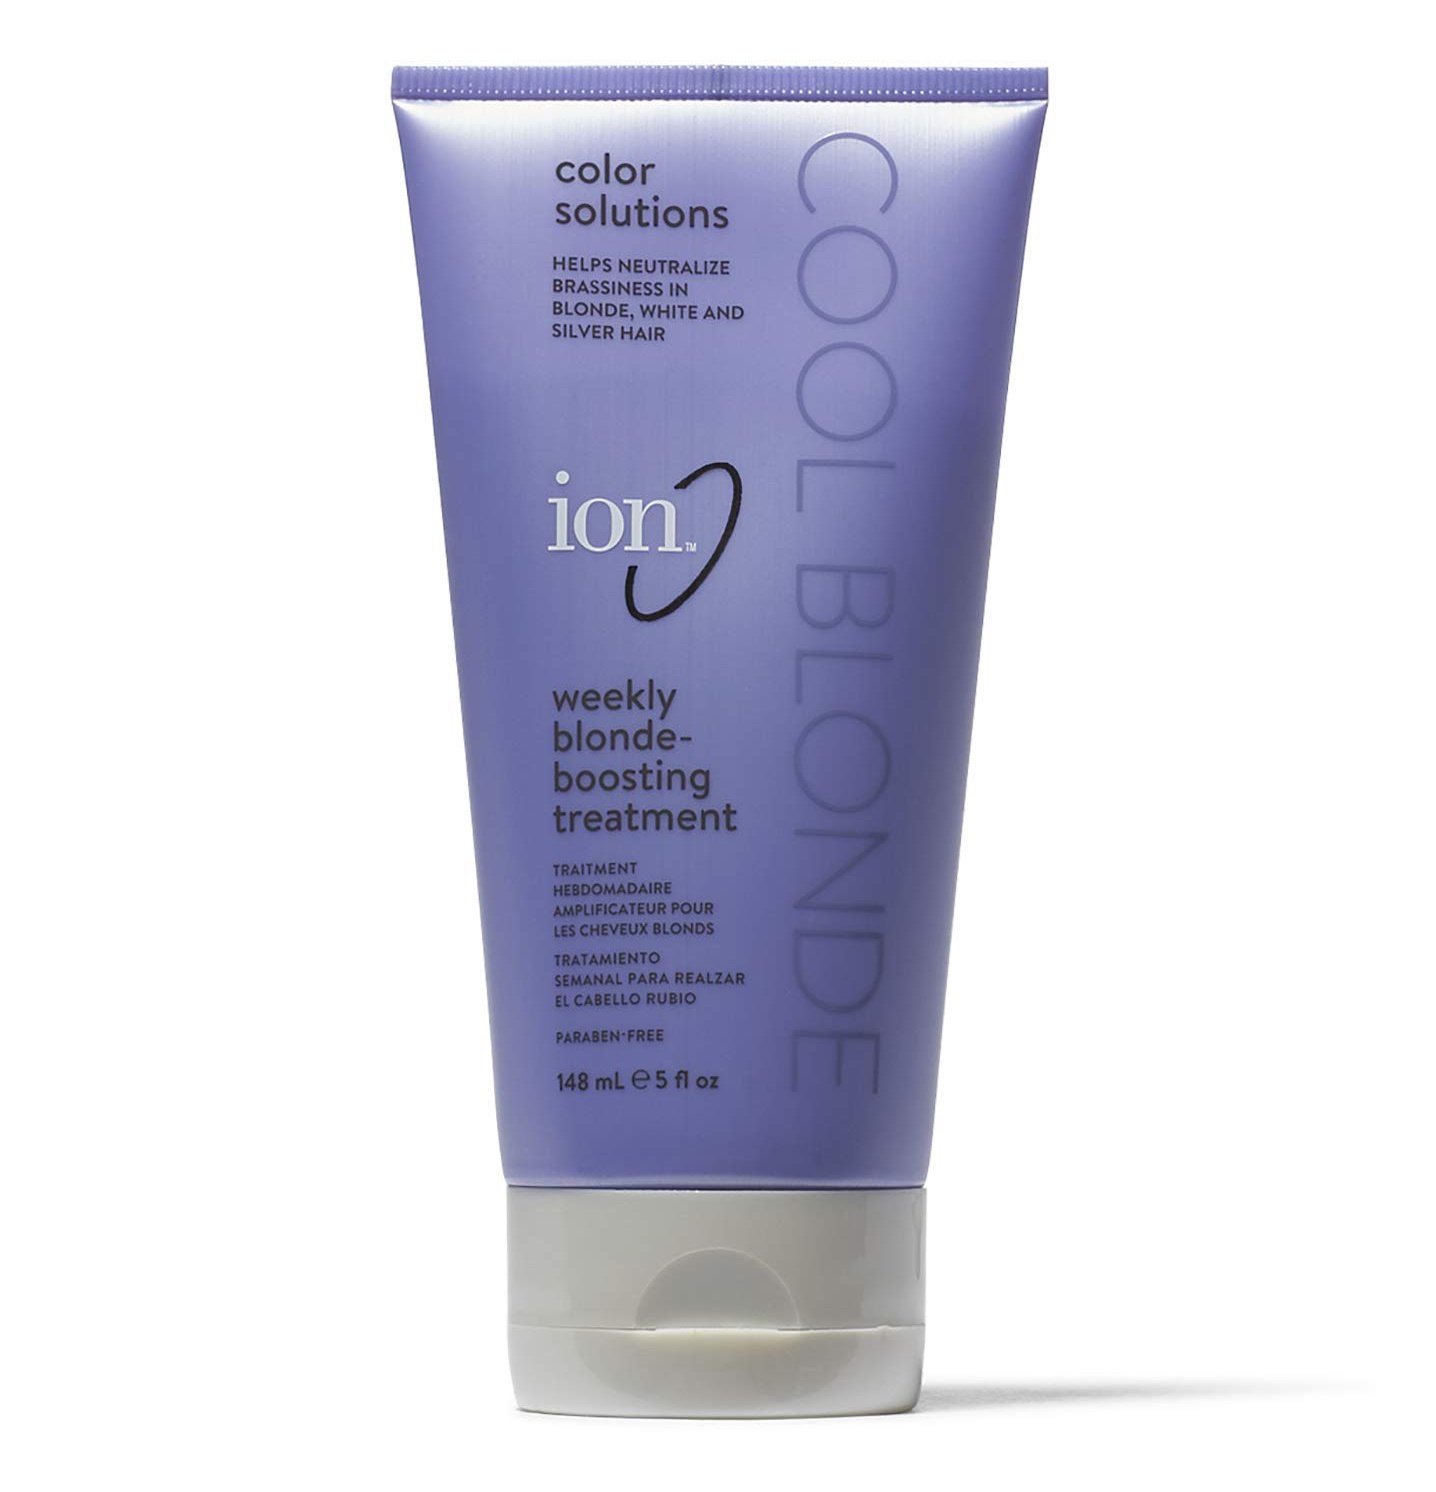 Ion Weekly Blonde Boosting Treatment ingredients (Explained)